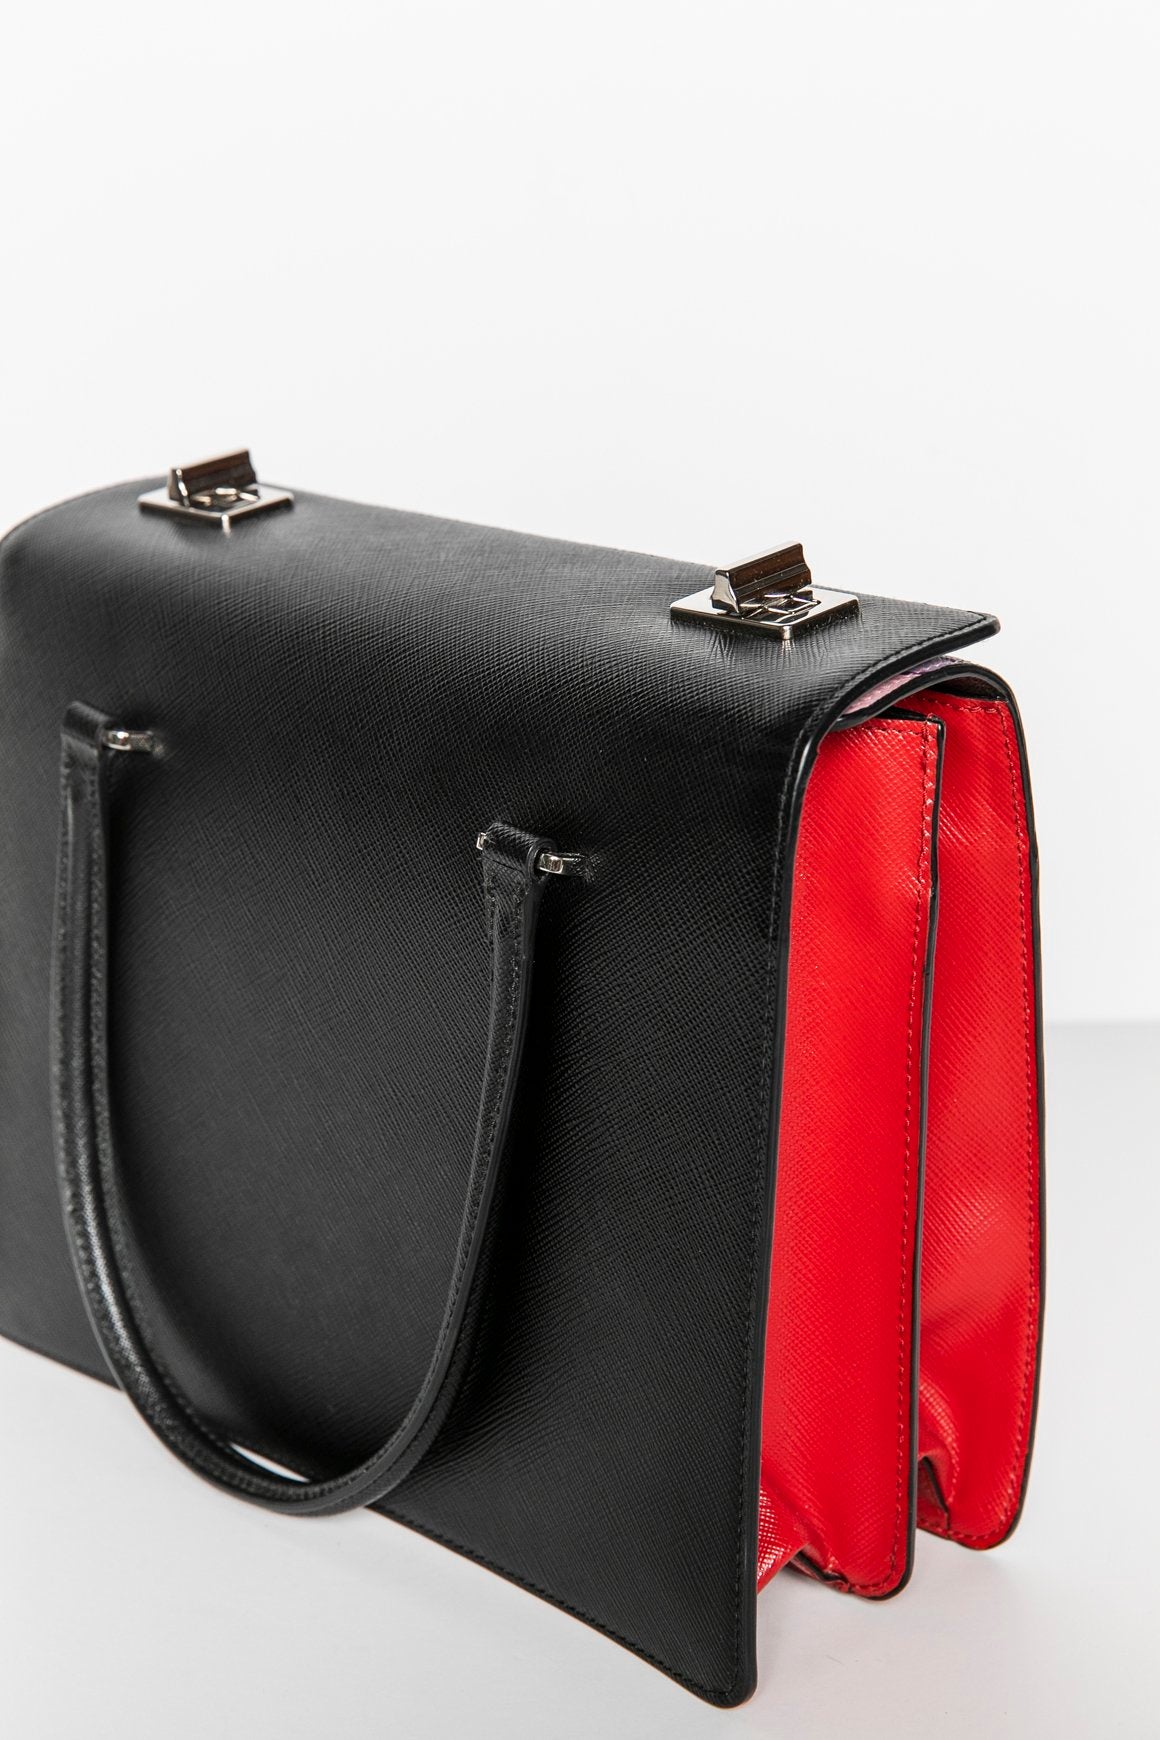 Clementine Leather Polly Crossbody Bag| Lulu Guinness